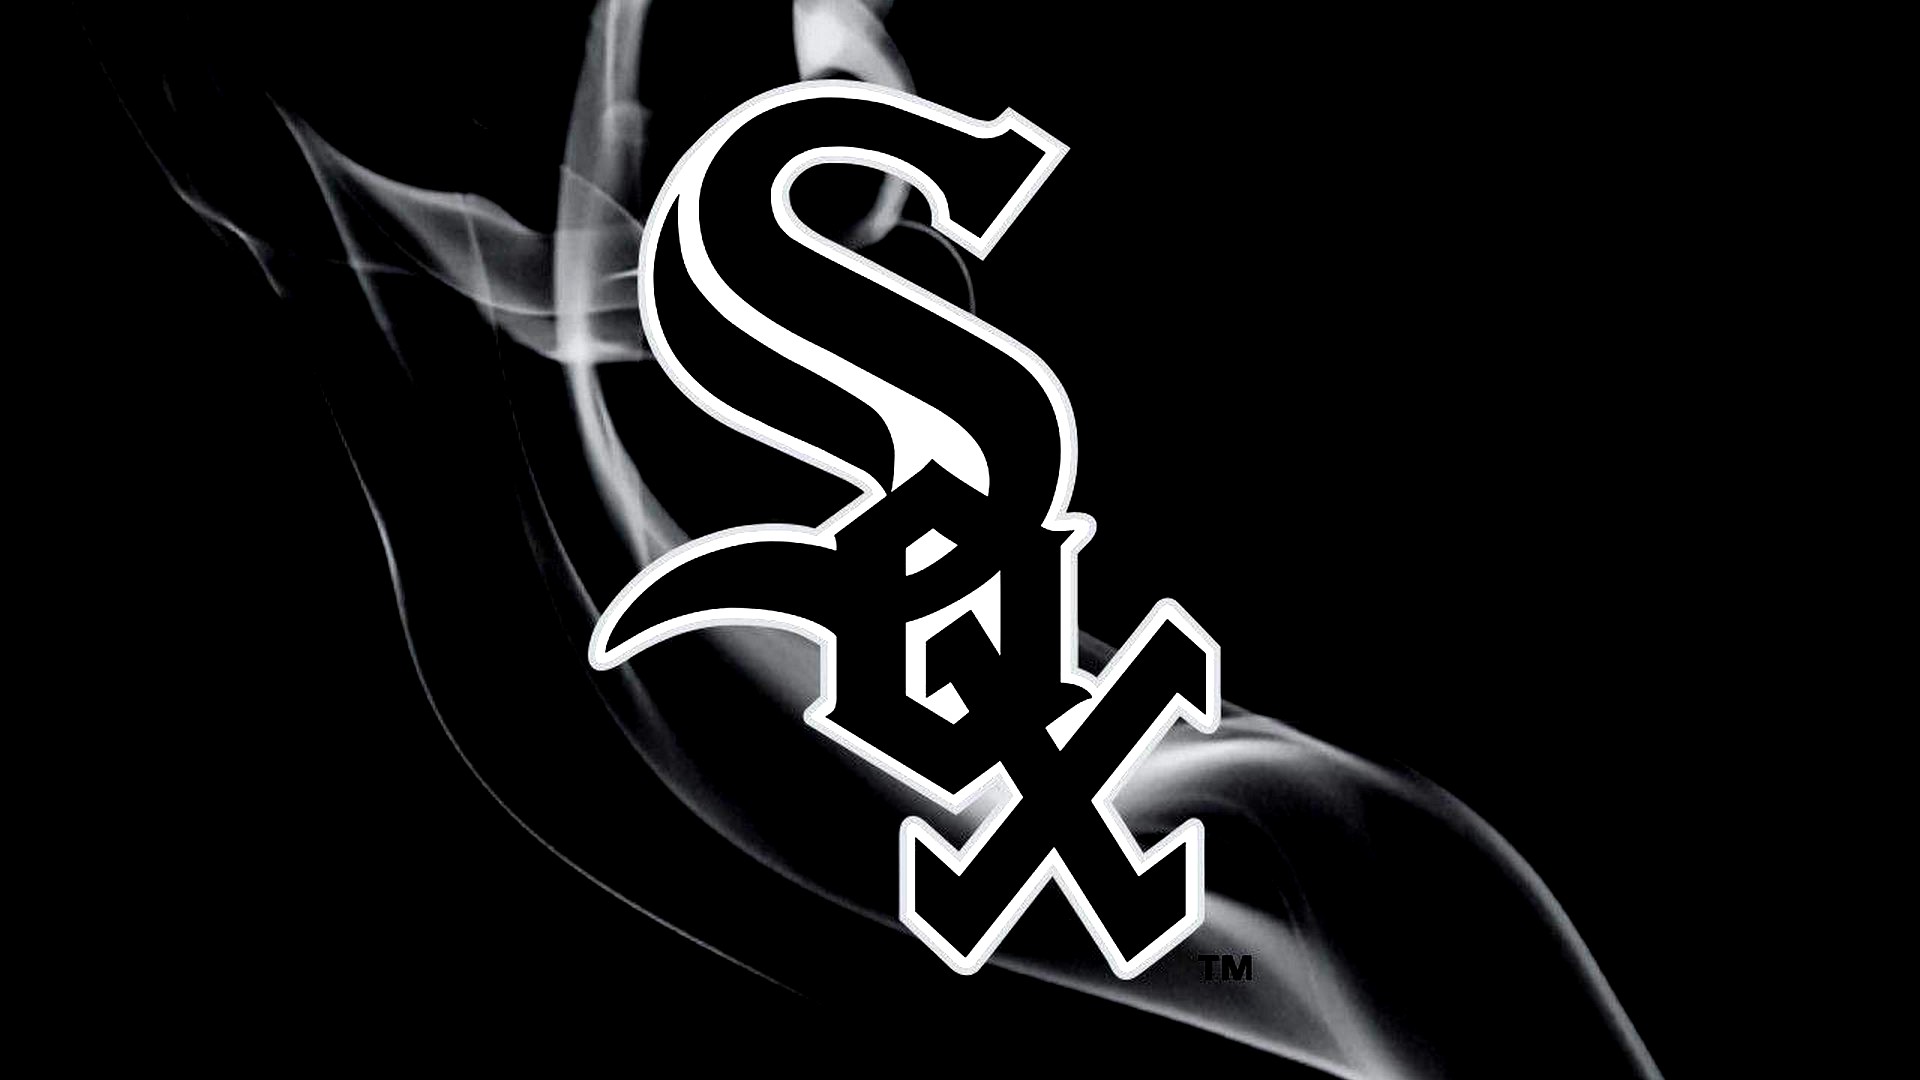 Chicago White Sox Backgrounds HD With high-resolution 1920X1080 pixel. You can use this wallpaper for Mac Desktop Wallpaper, Laptop Screensavers, Android Wallpapers, Tablet or iPhone Home Screen and another mobile phone device